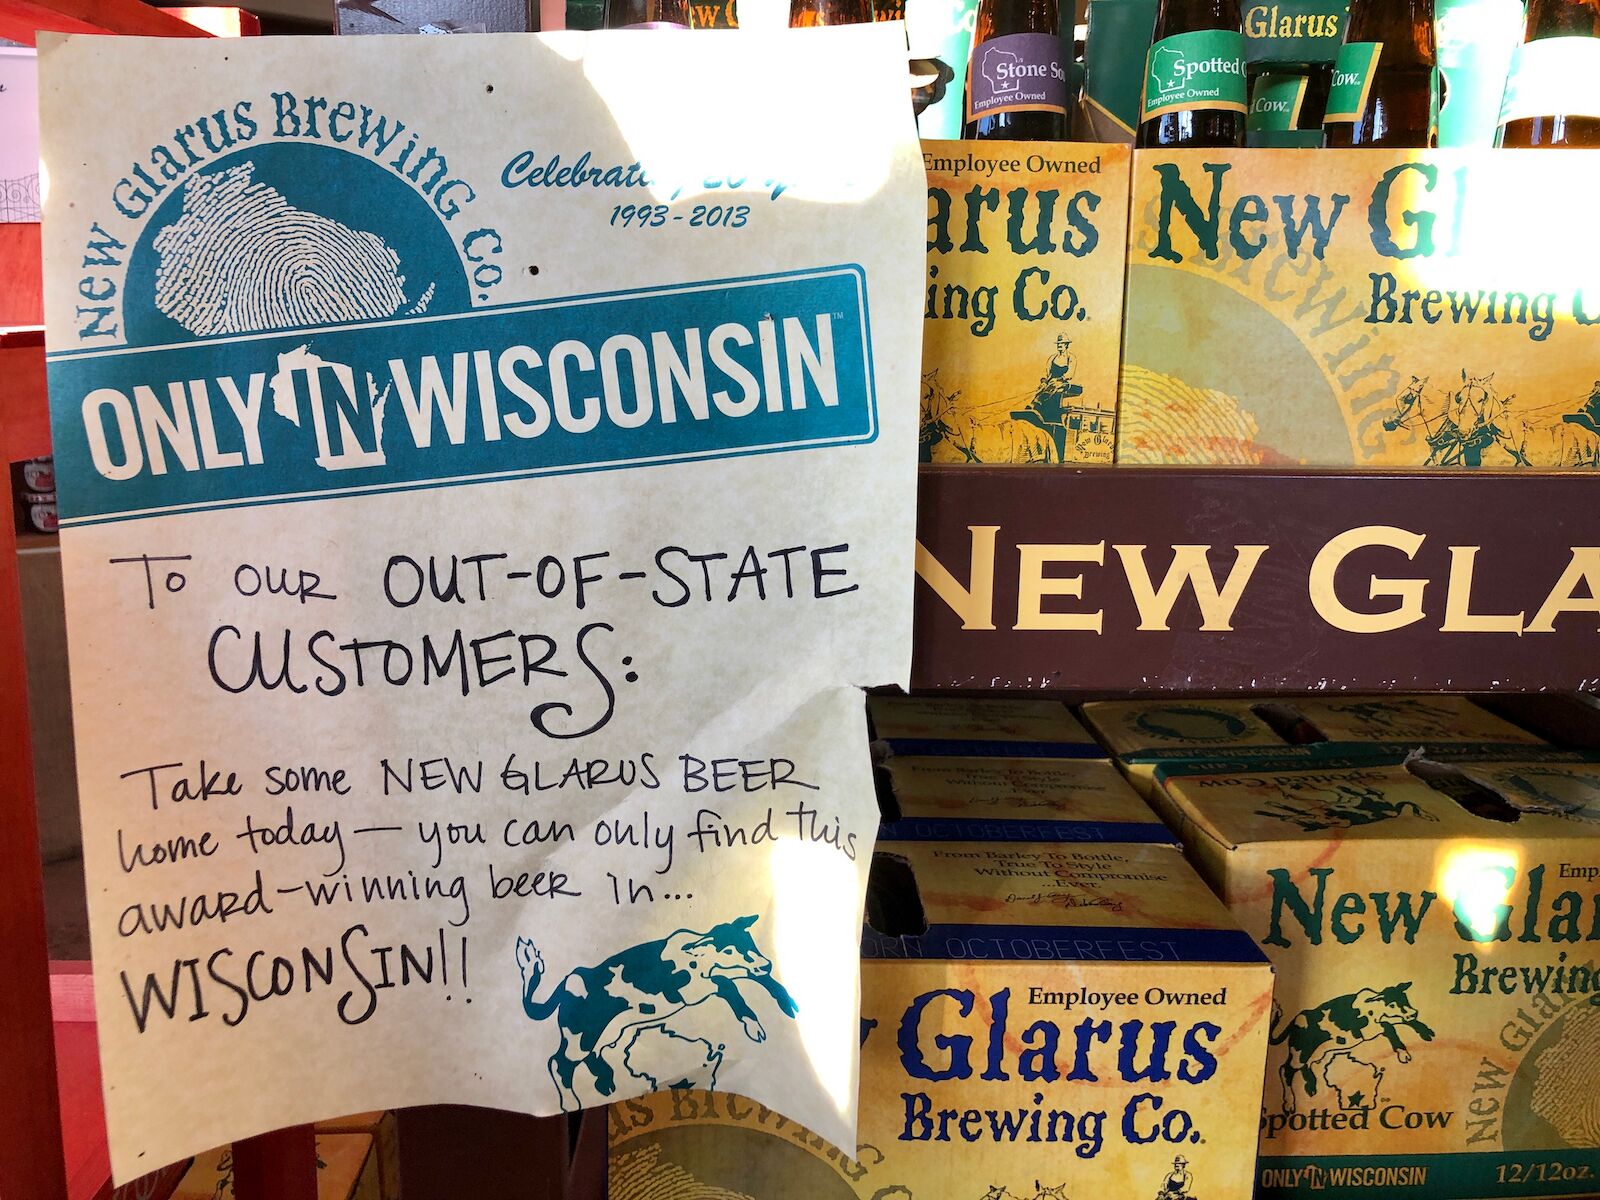 Bayfield, Wisconsin - October 20, 2019: Sign reminds customers that New Glarus beer products, including Spotted Cow, are only sold in Wisconsin